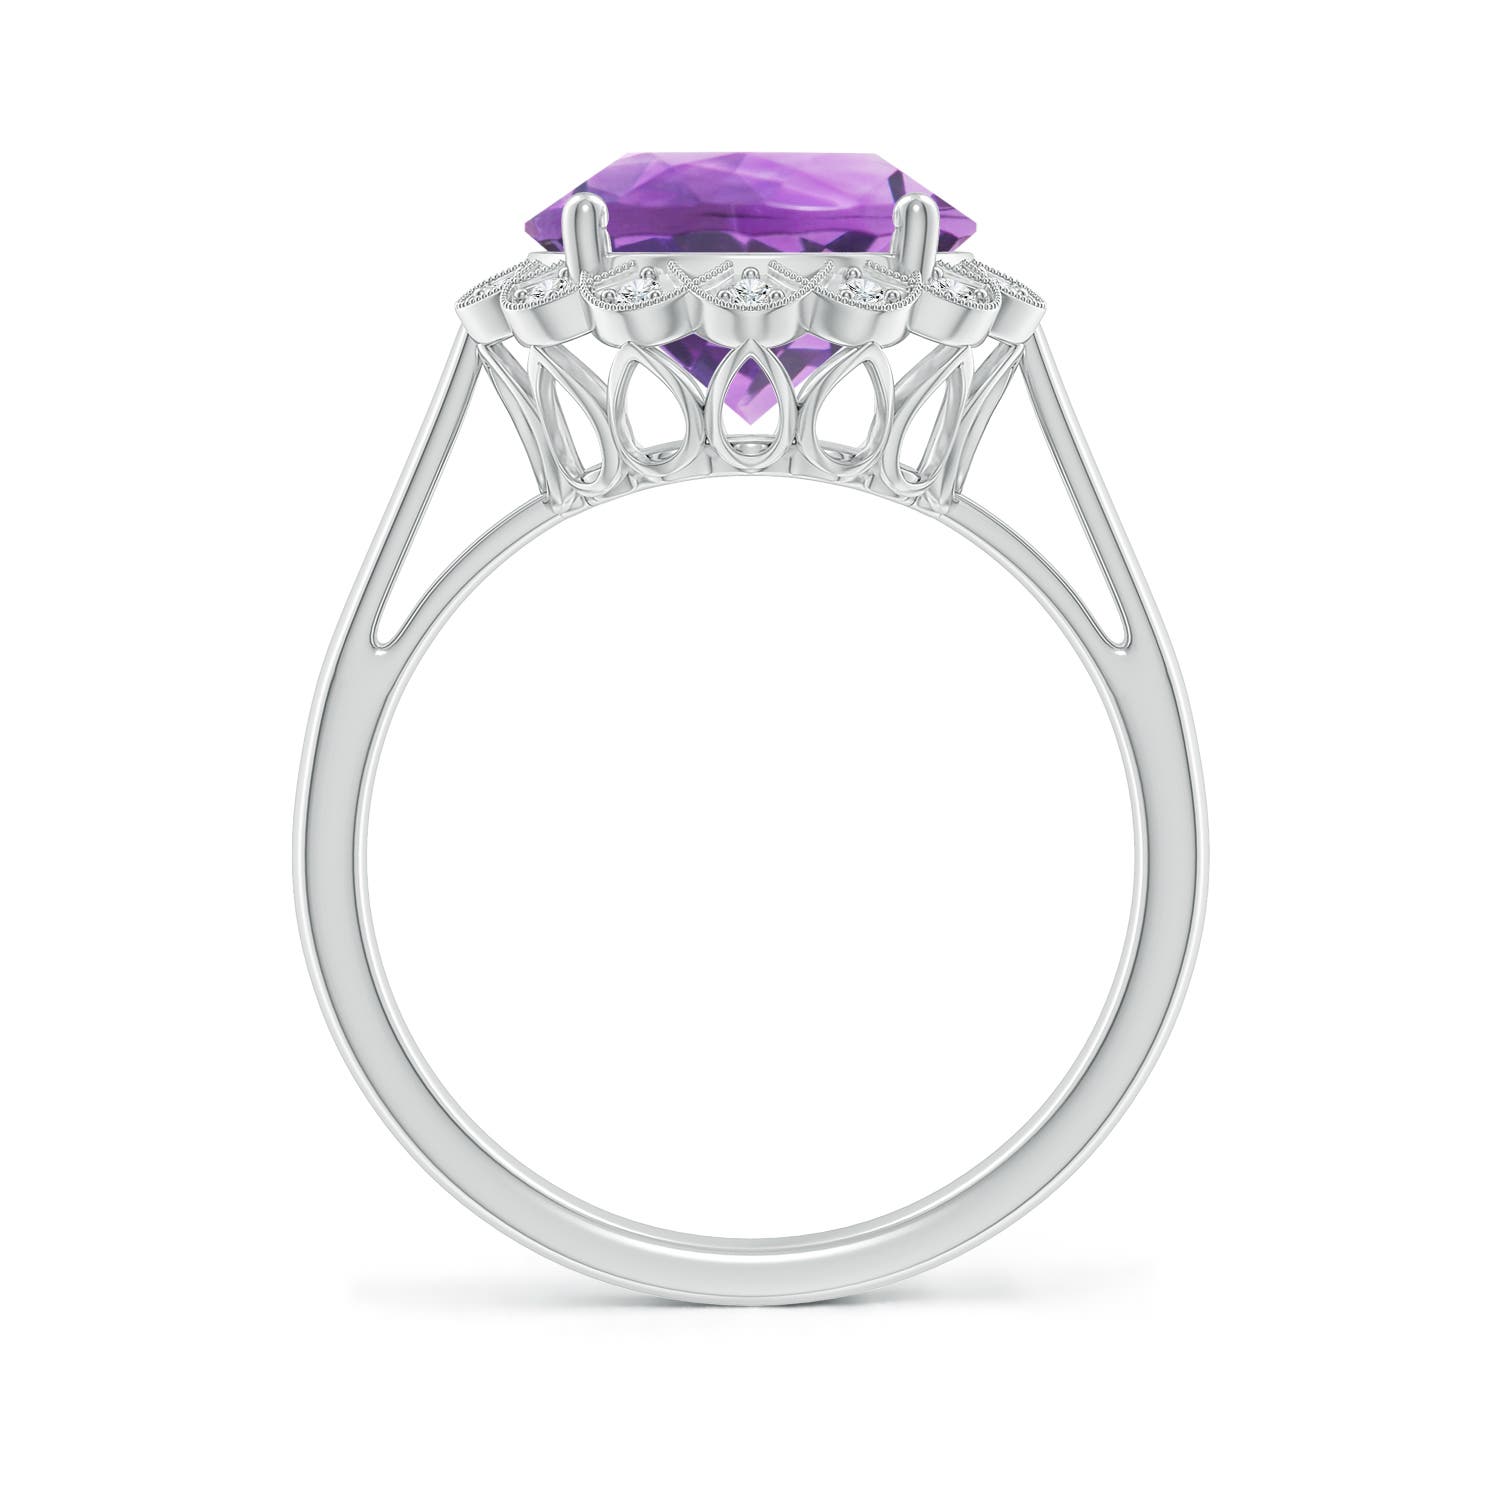 A - Amethyst / 3.28 CT / 14 KT White Gold